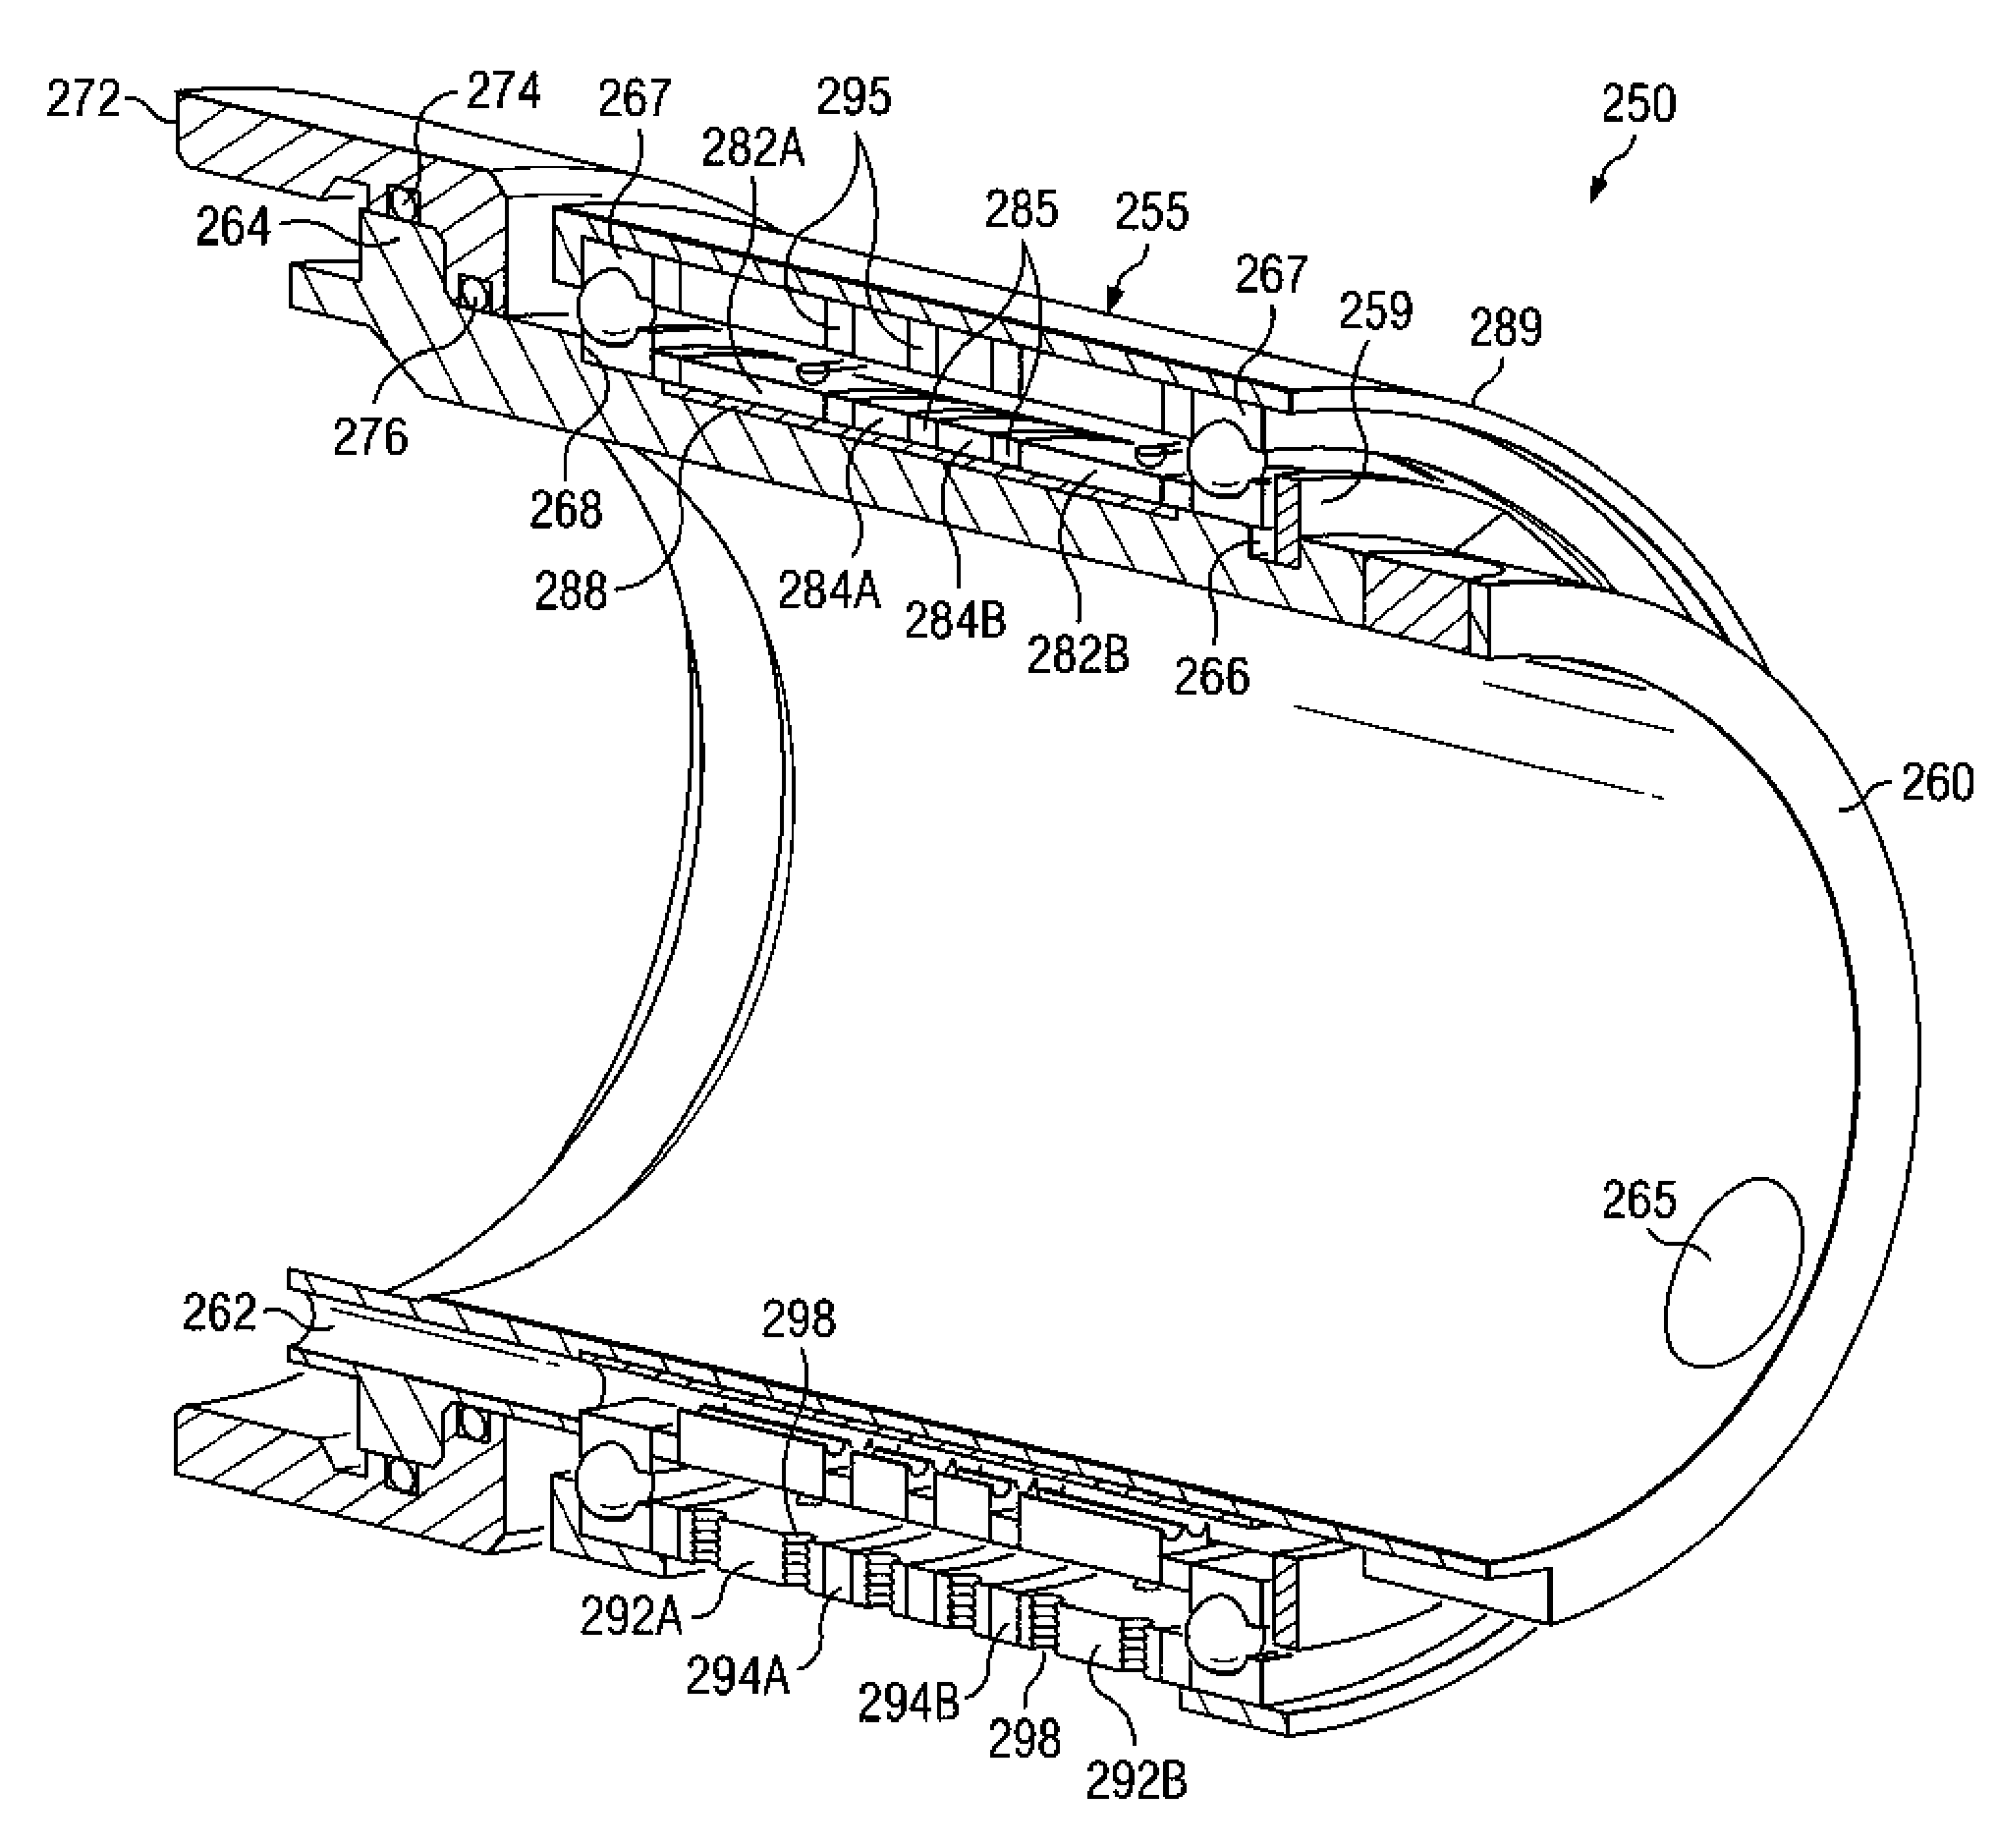 Slip ring apparatus for a rotary steerable tool